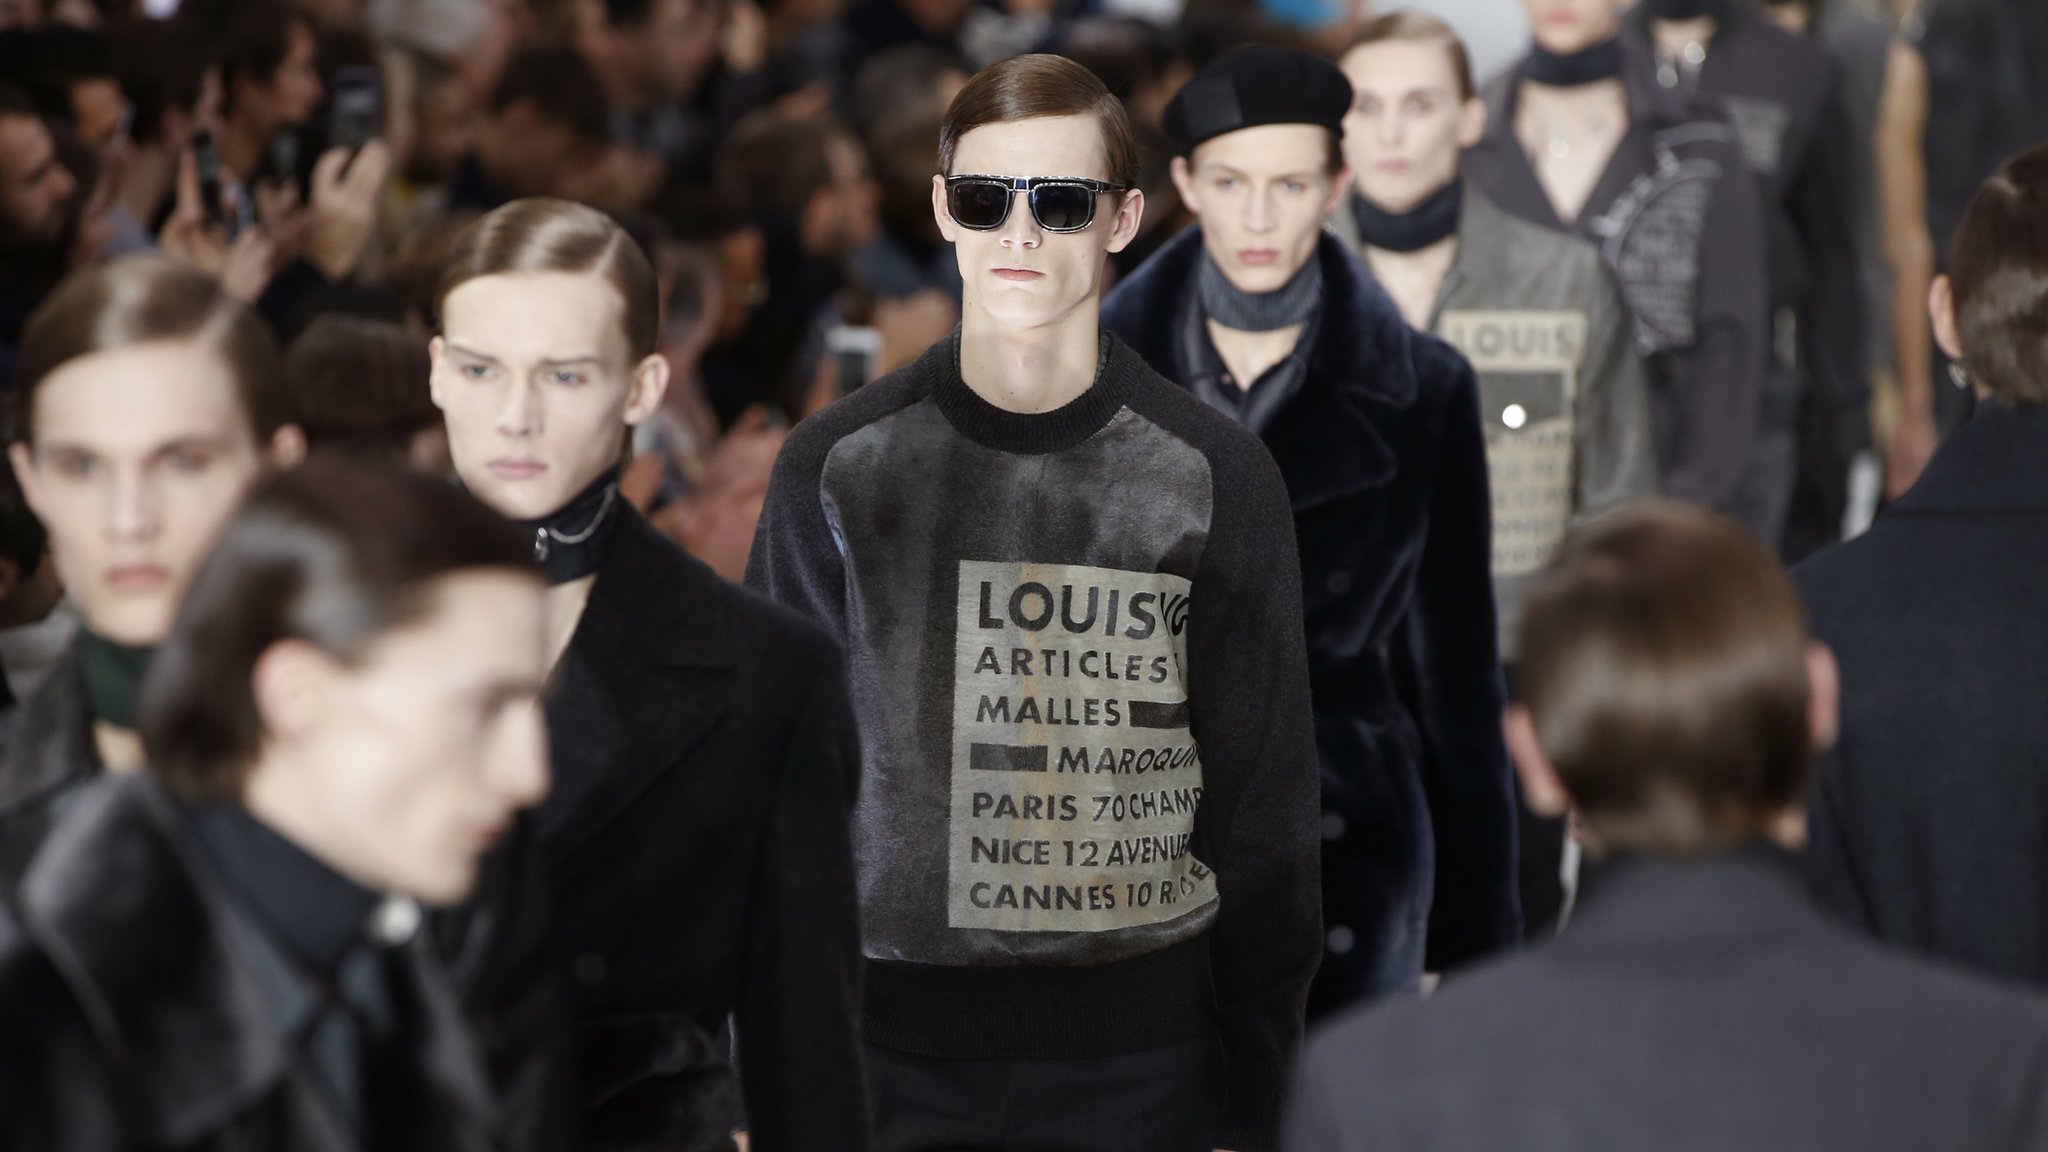 LVMH revenue jumps 17%, reports record-setting year